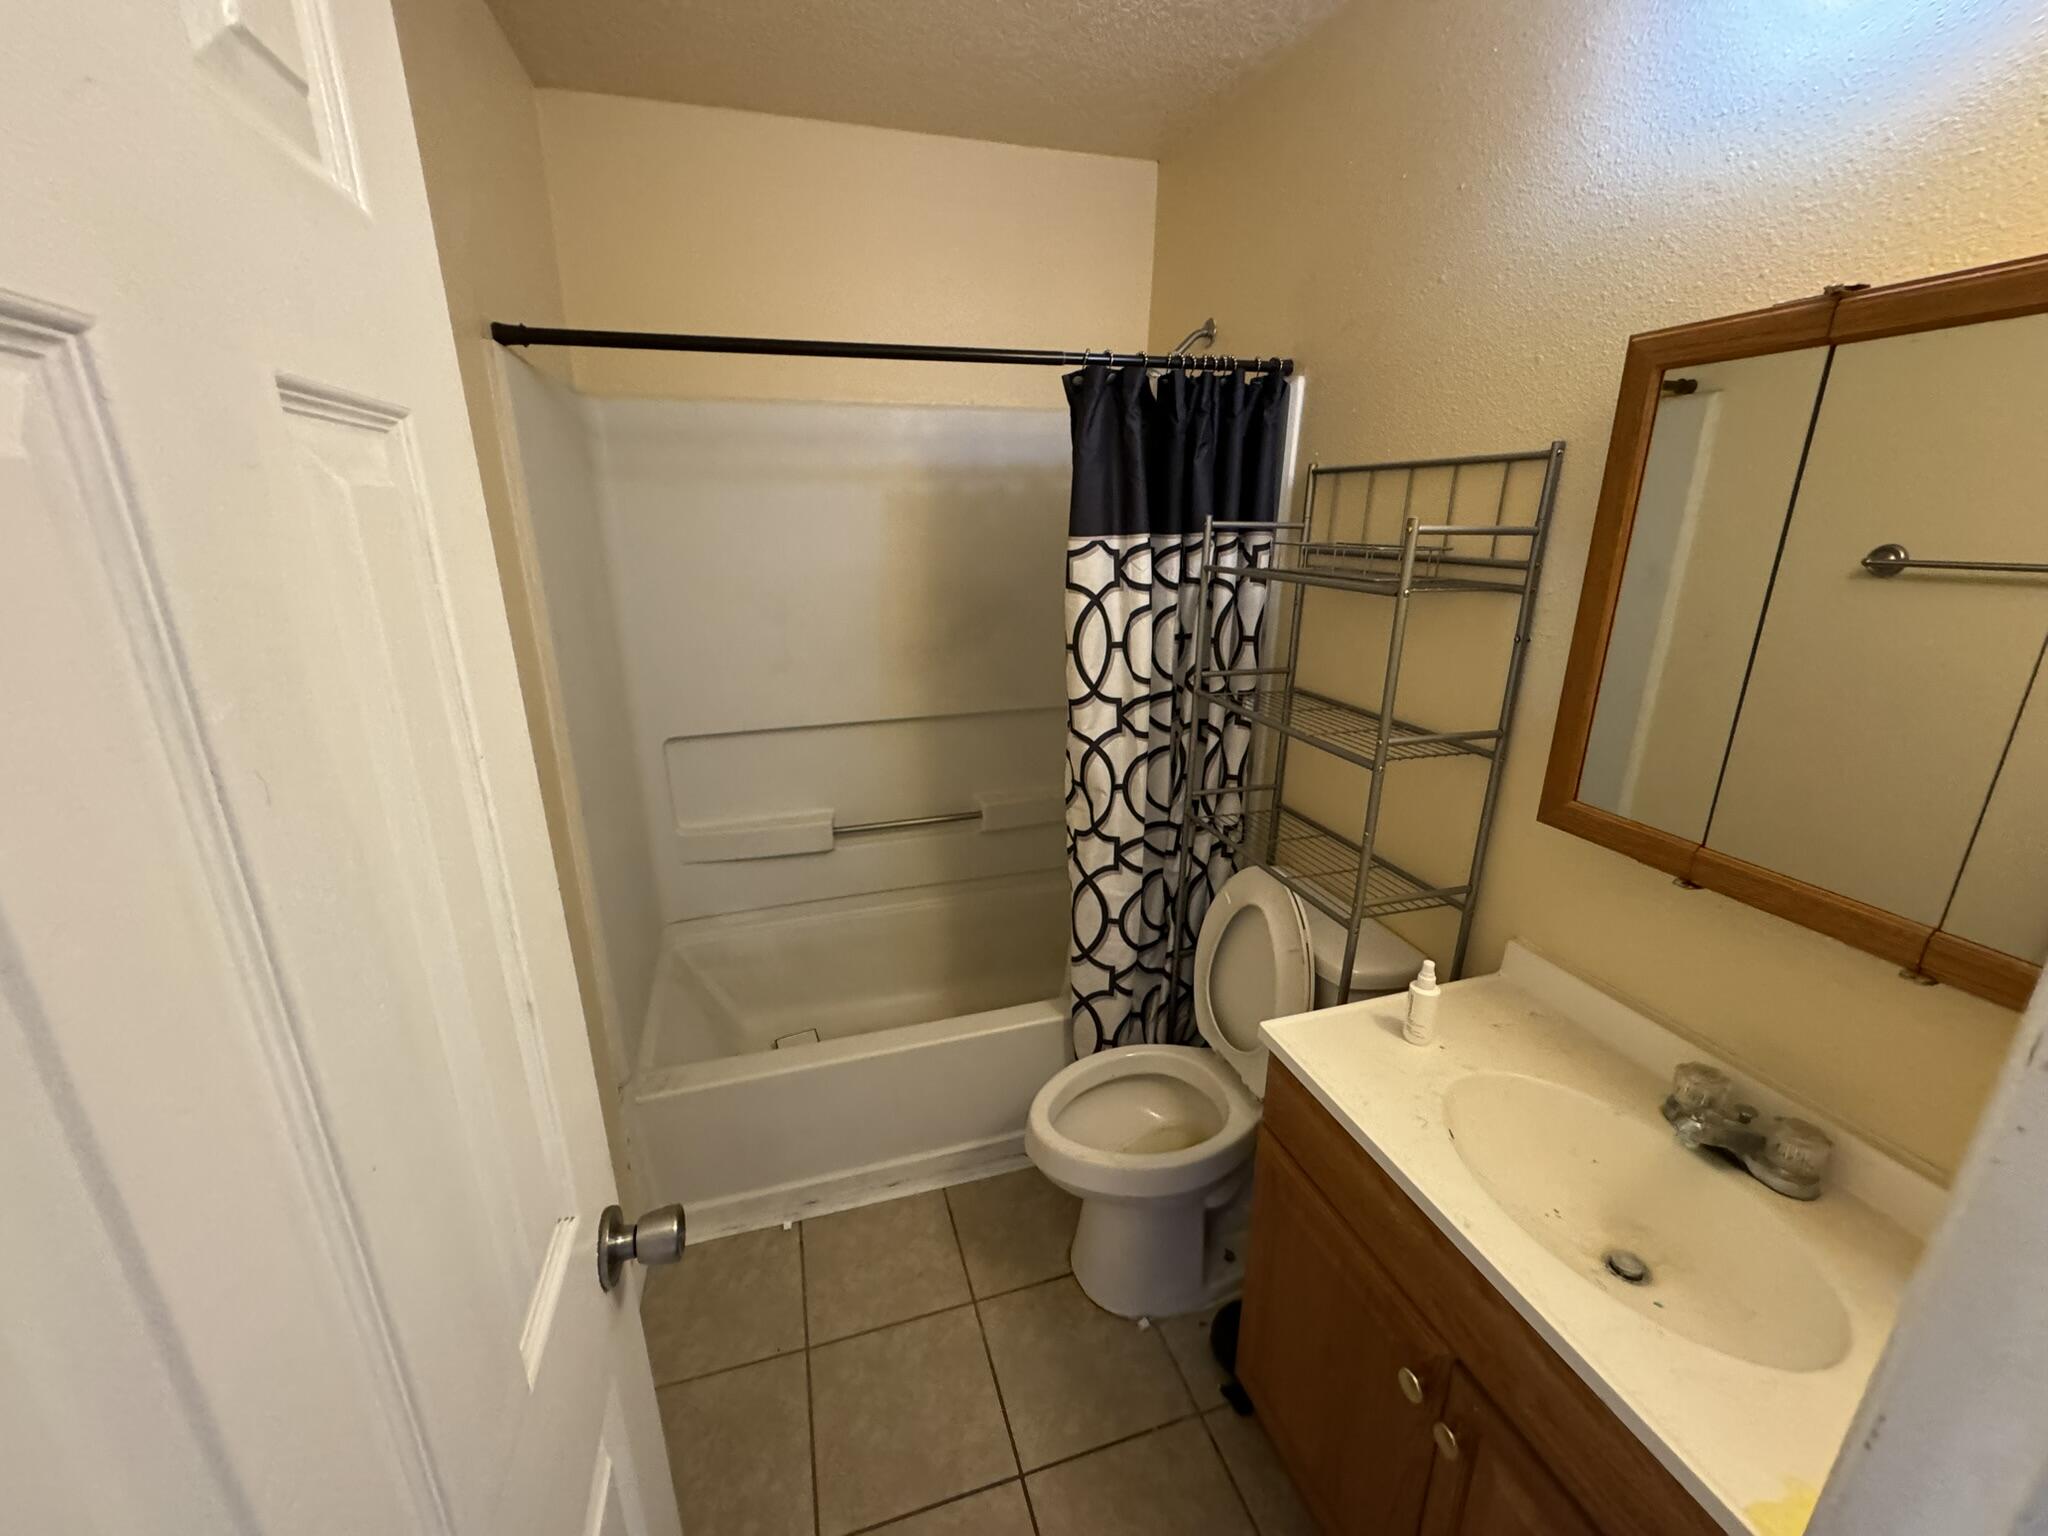 620 Chama Street SE, Albuquerque, New Mexico 87108, 2 Bedrooms Bedrooms, ,1 BathroomBathrooms,Residential Income,For Sale,620 Chama Street SE,1059601